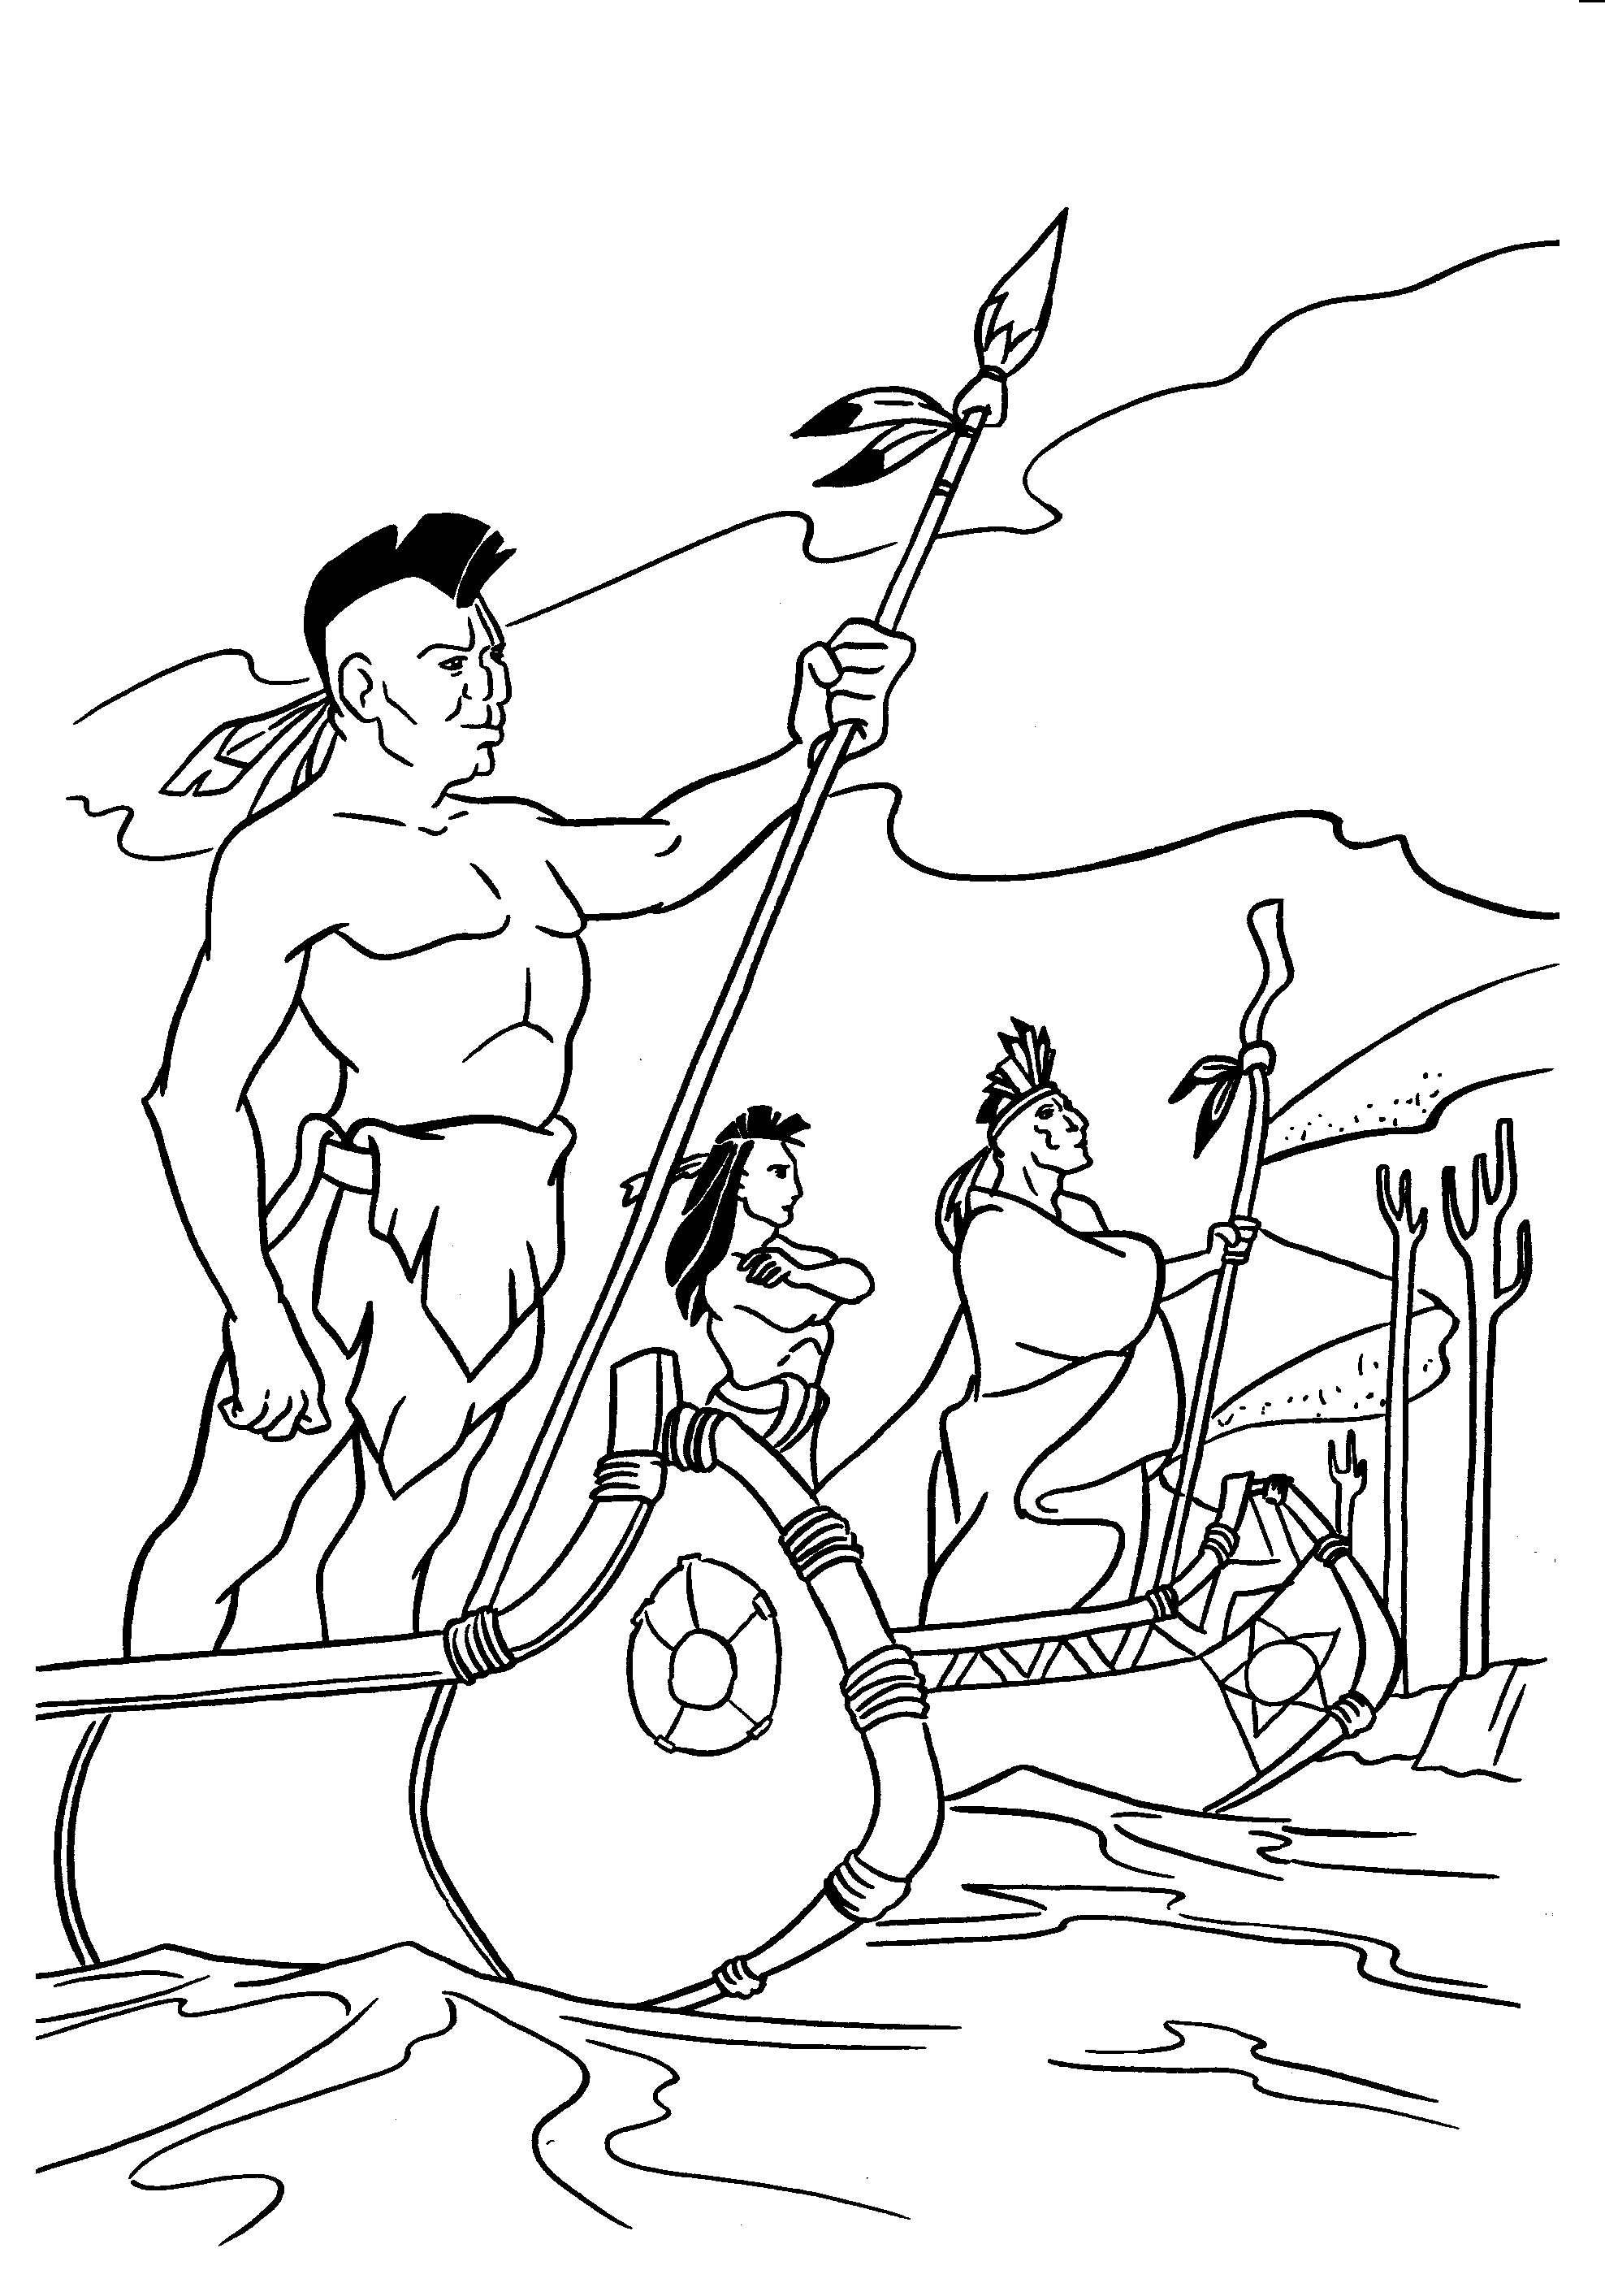 Cherokee Indian Coloring Pages For Book - Coloring Pages For All Ages